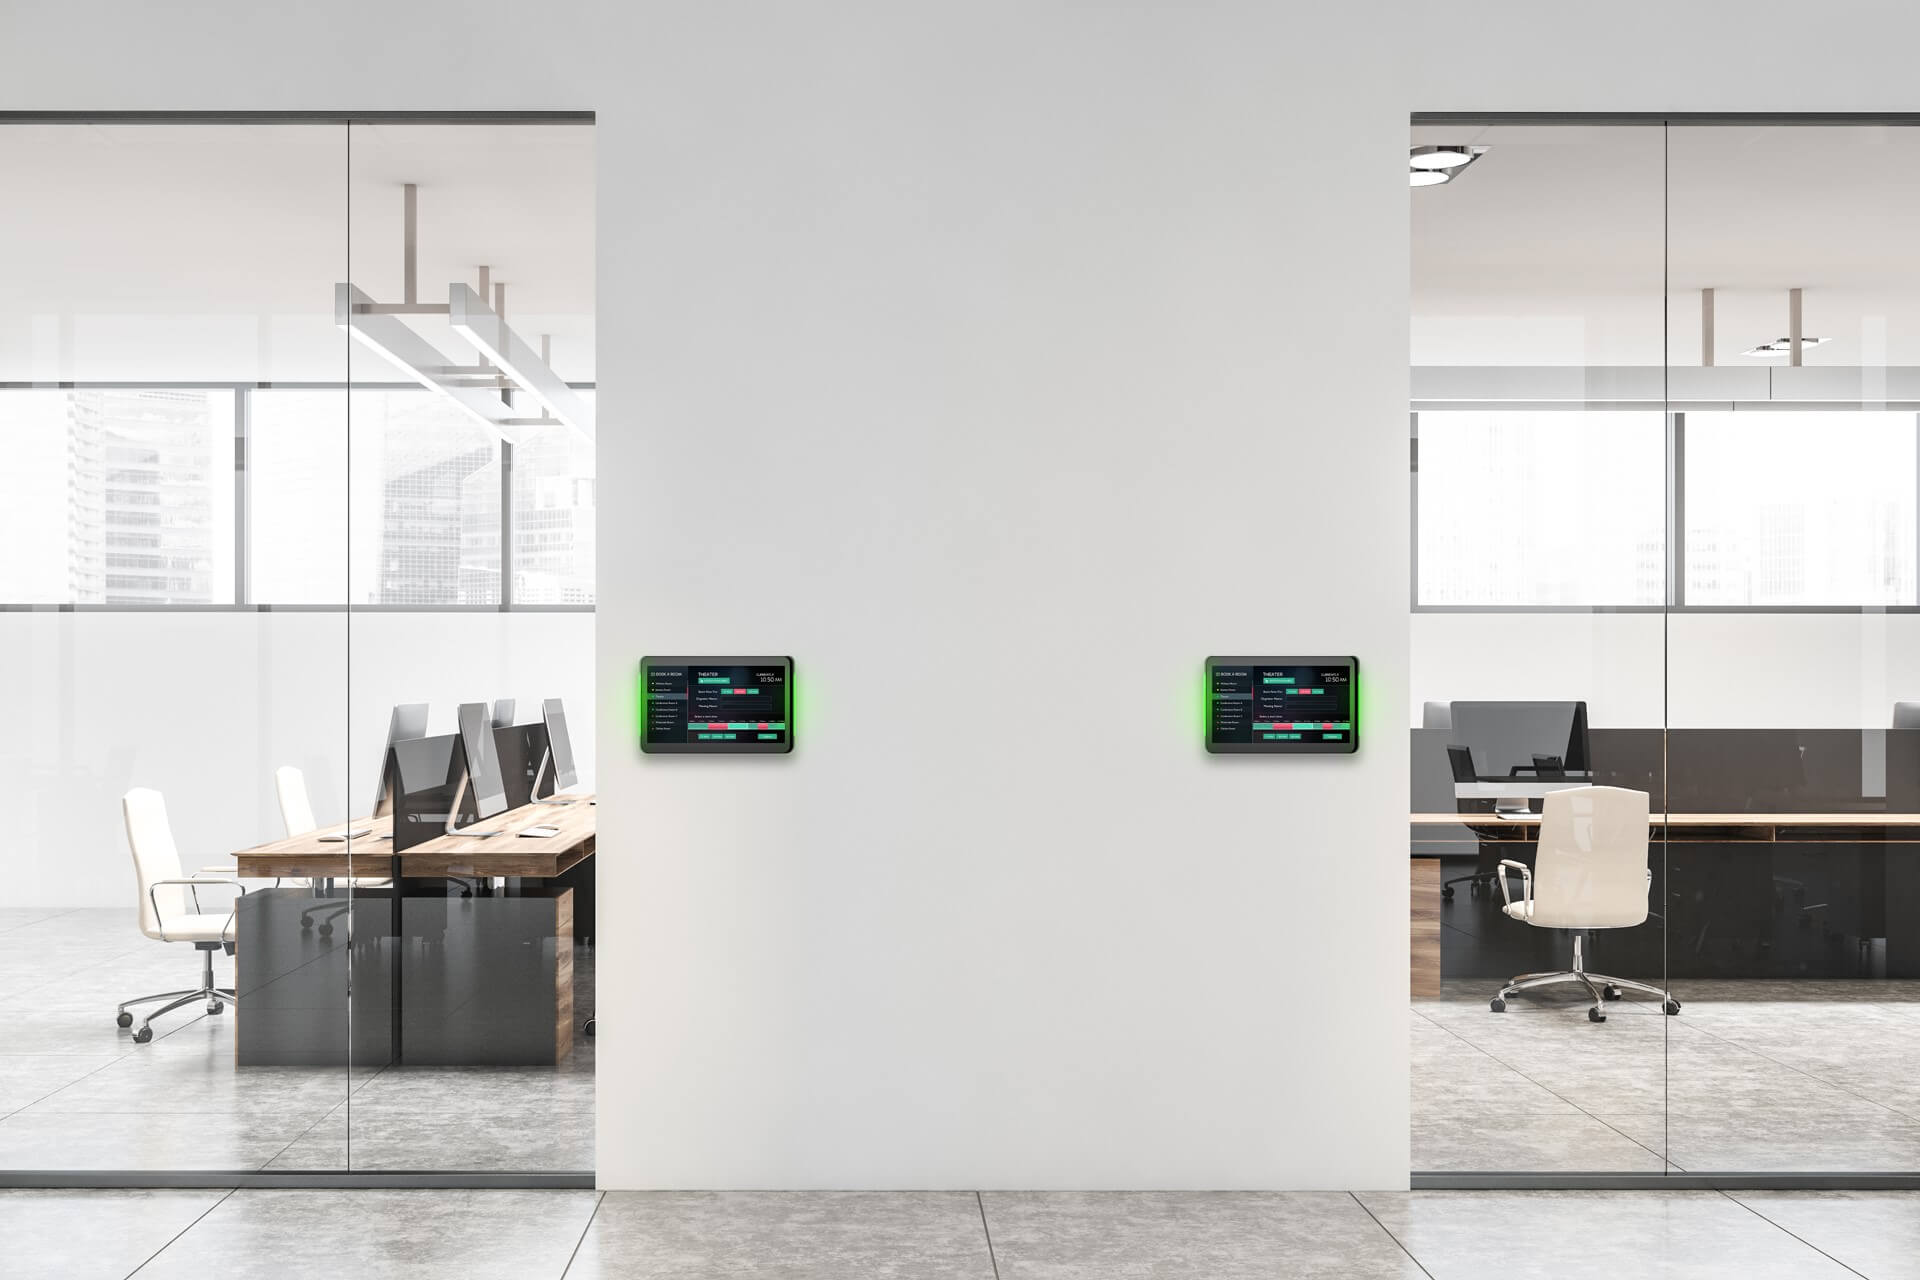 XDS-1078 with NFC technology installed on the wall outside meeting room